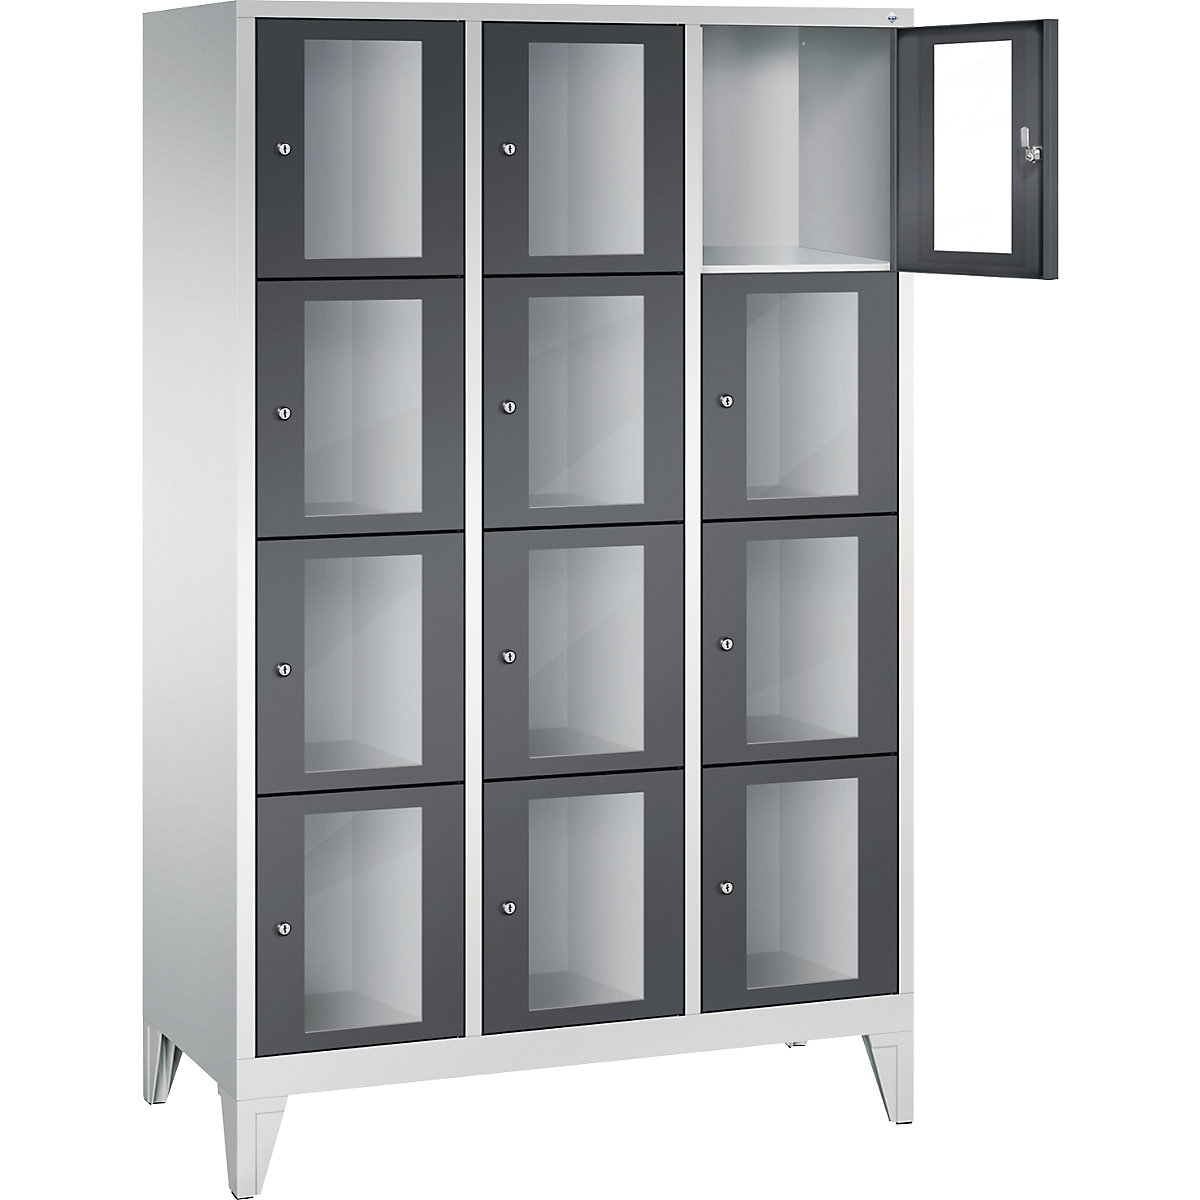 C+P – CLASSIC locker unit, compartment height 375 mm, with feet, 12 compartments, width 1200 mm, black grey door